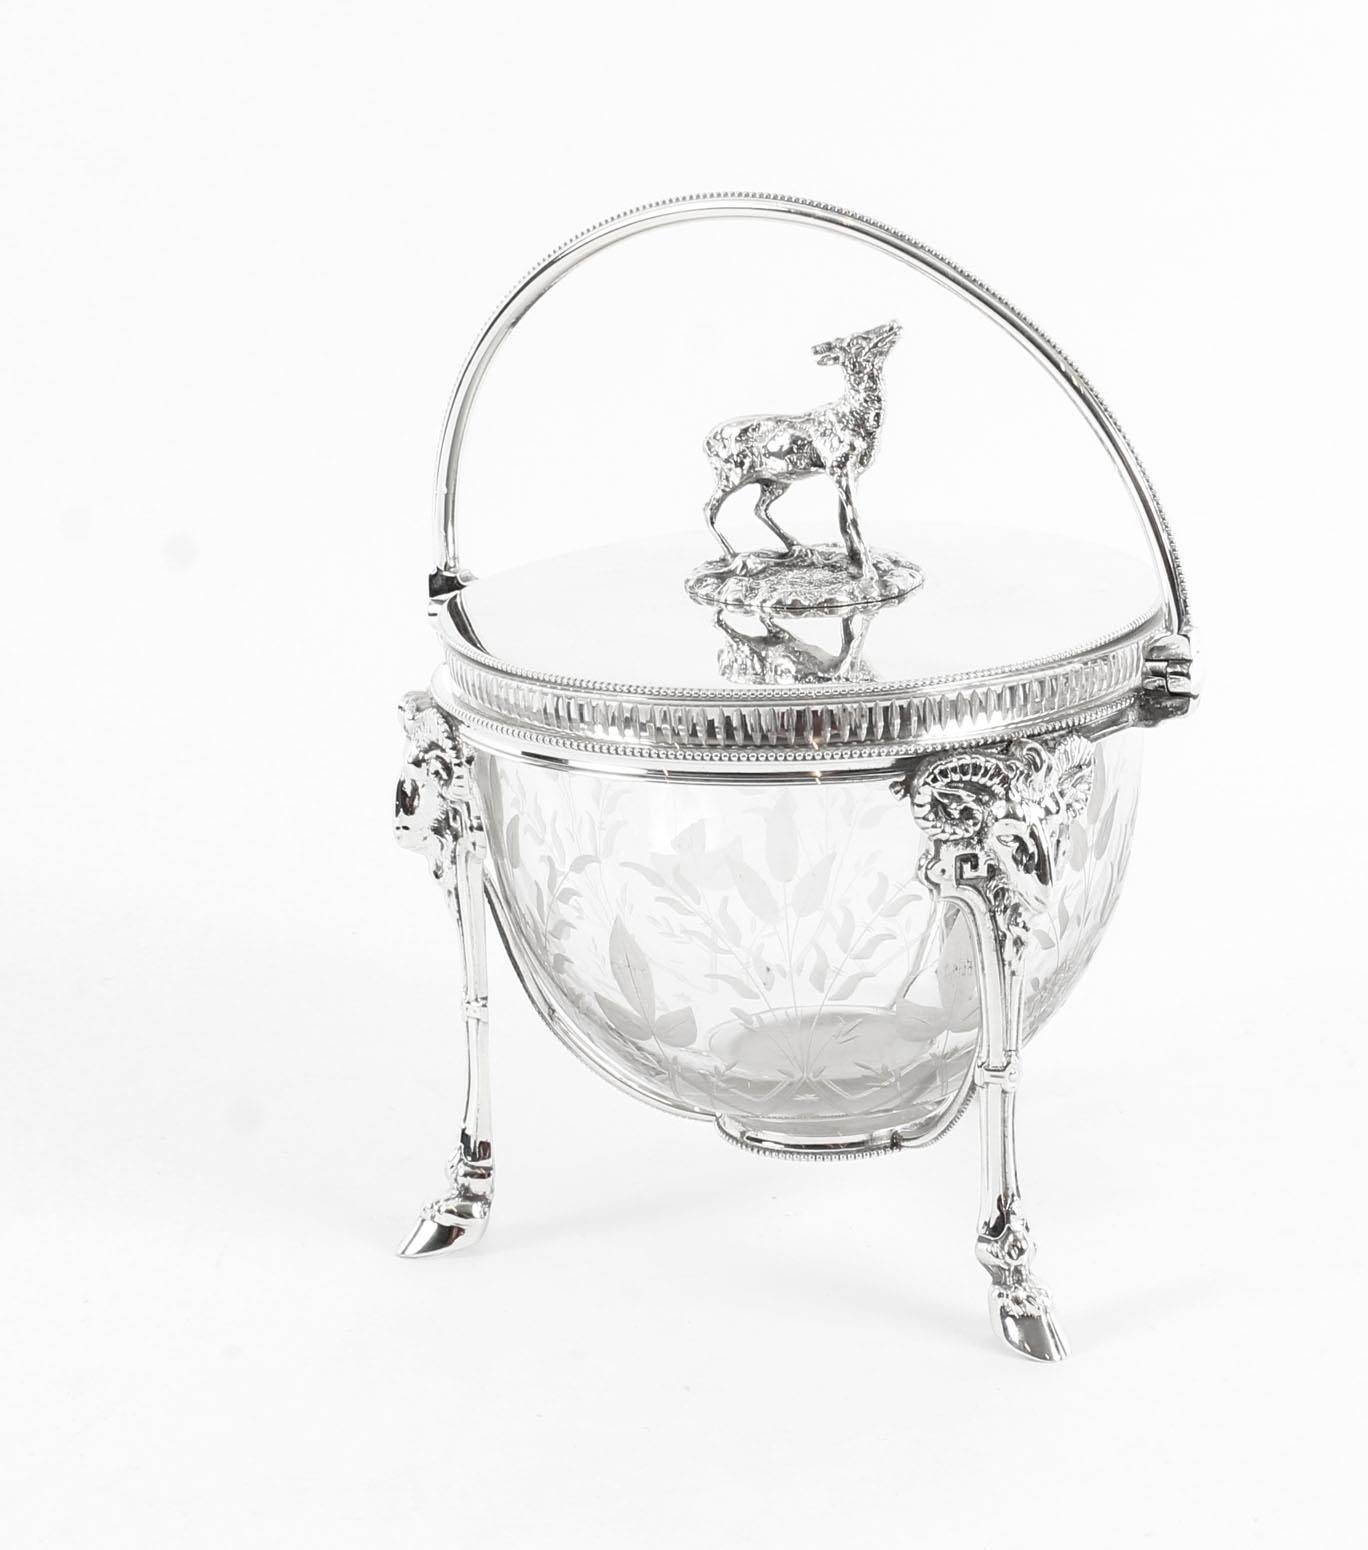 This is an exquisite antique Victorian silver plated and engraved crystal biscuit box, circa 1860 in date.

The round lift up lid features a free standing deer finial and is fitted with a swing handle. The wonderful engraved crystal cylinder is